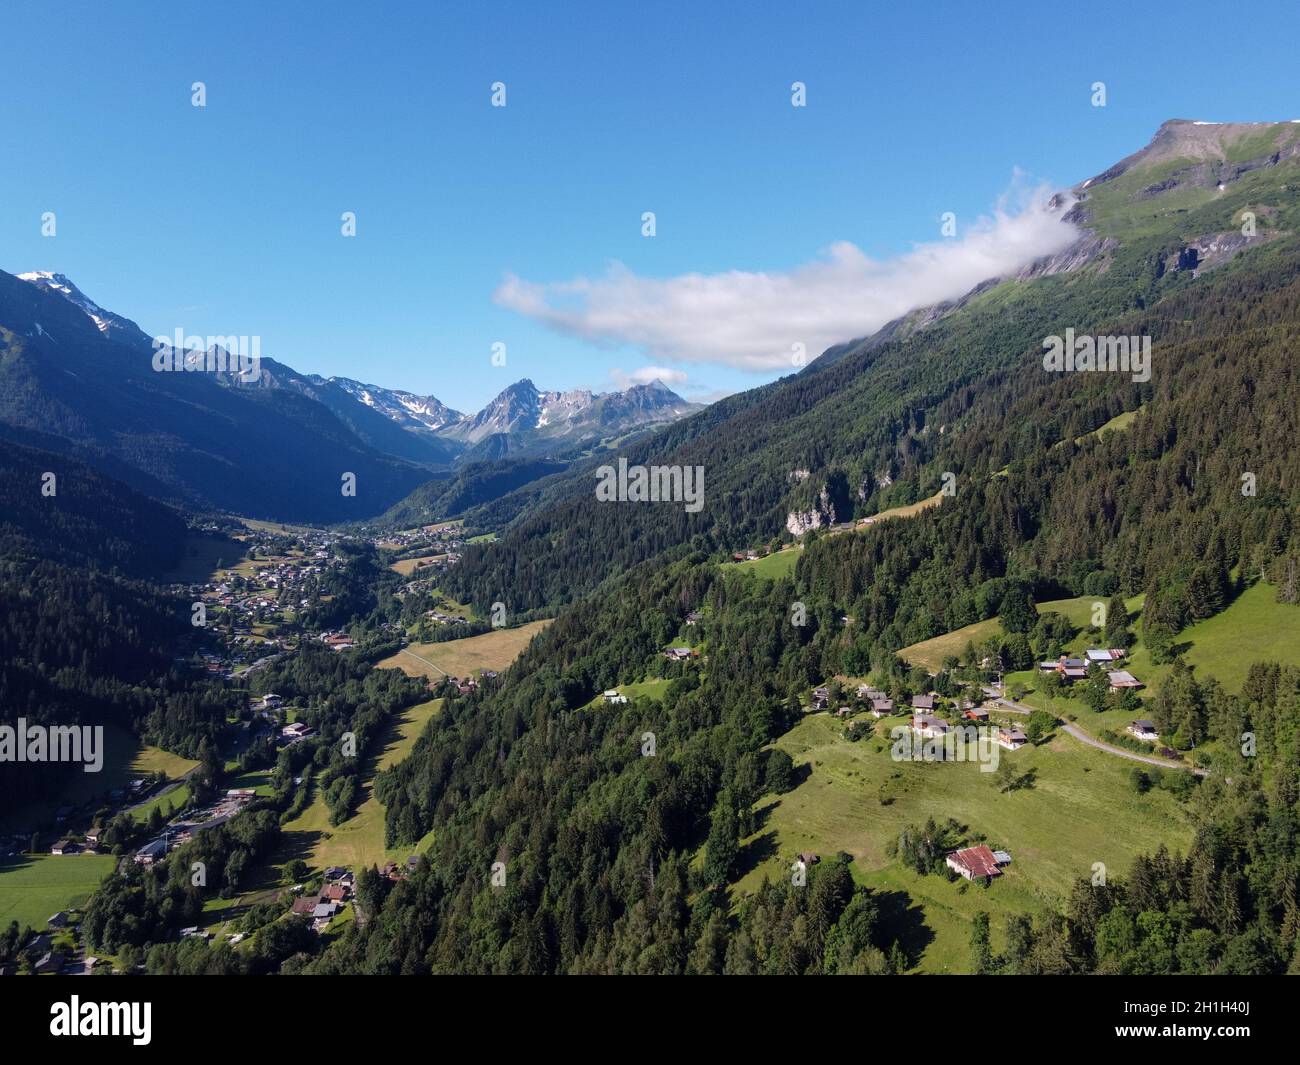 Panoramic view on mountain villages, green forests and apline meadows near Saint-Gervais-les-Bains, Savoy, France in summer Stock Photo